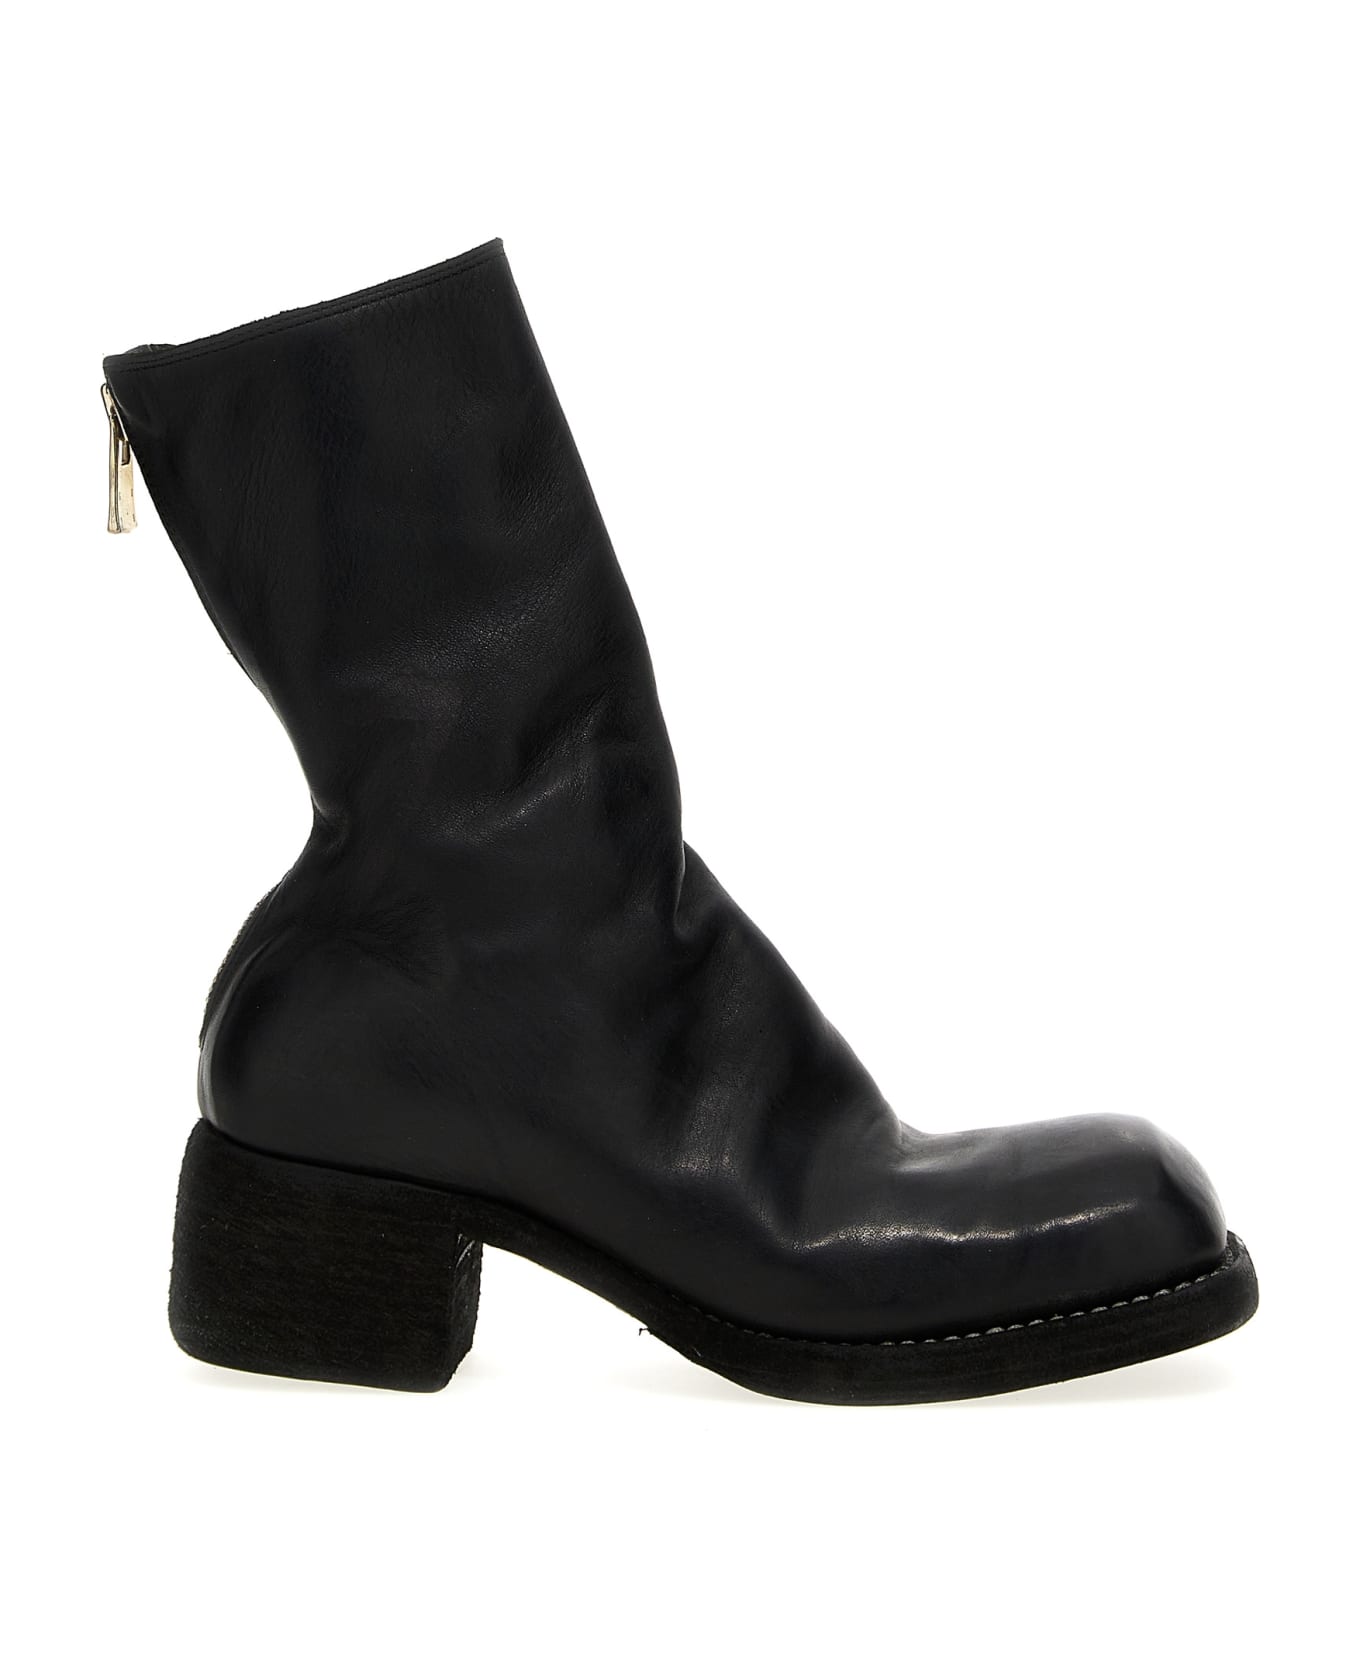 Guidi '9088' Ankle Boots - Black   ブーツ